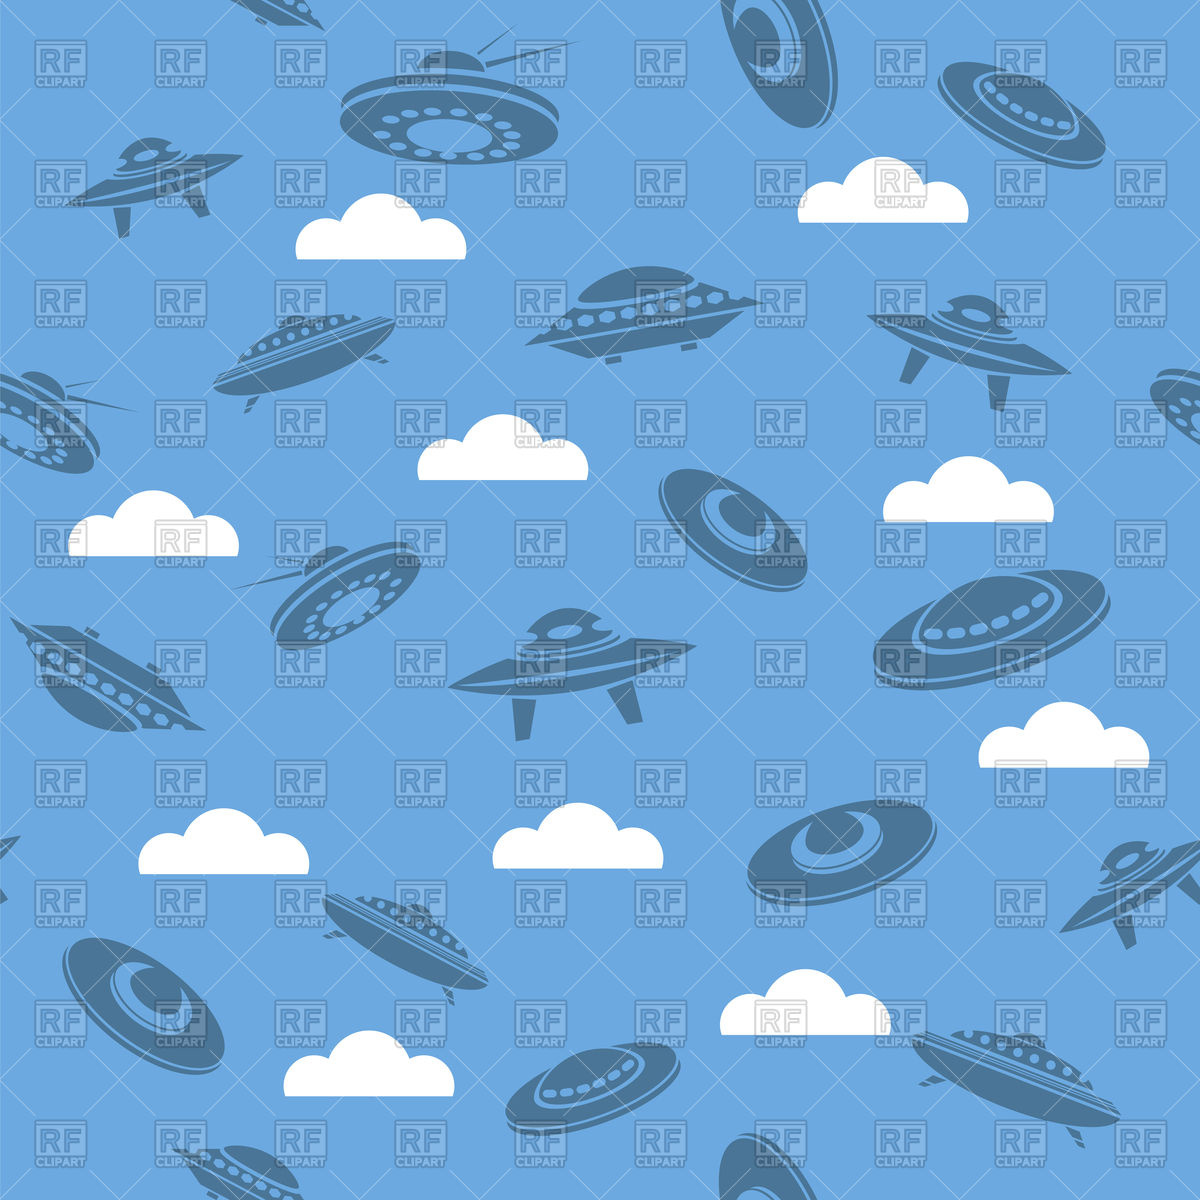 Alien Spaceship Or Flying Saucer Seamless Pattern On Blue Sky